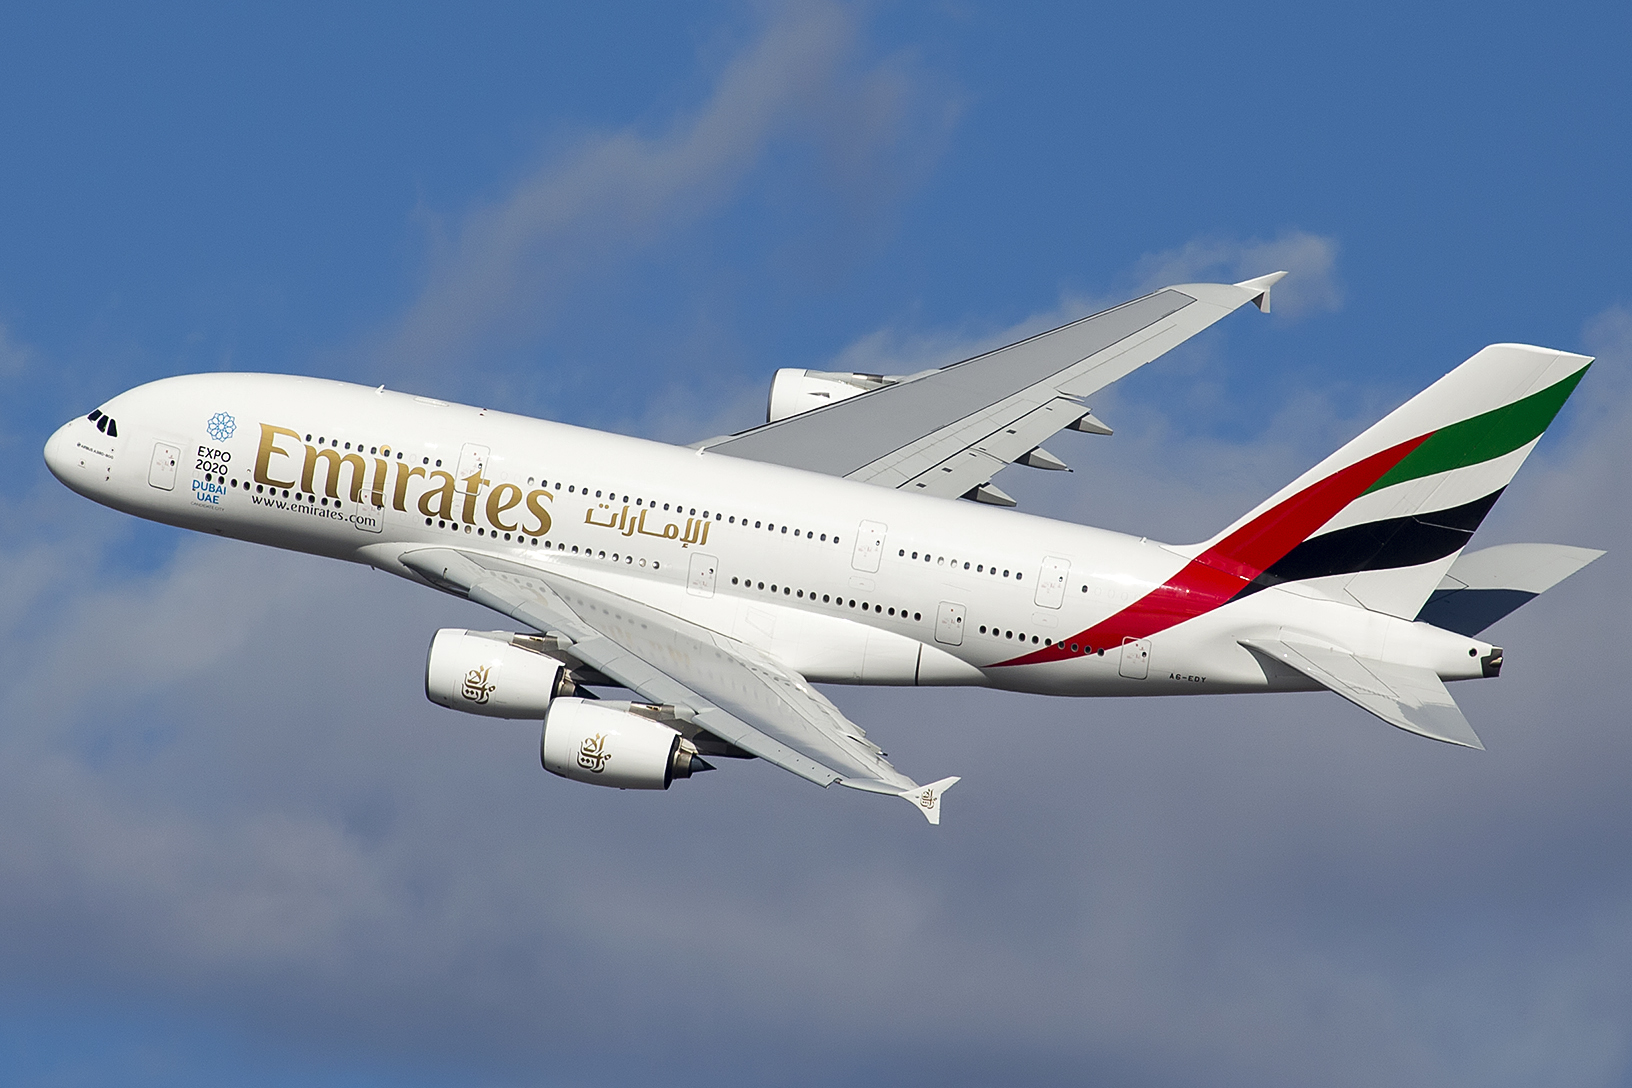 Emirates announces resumption of its daily service between Taipei and Dubai